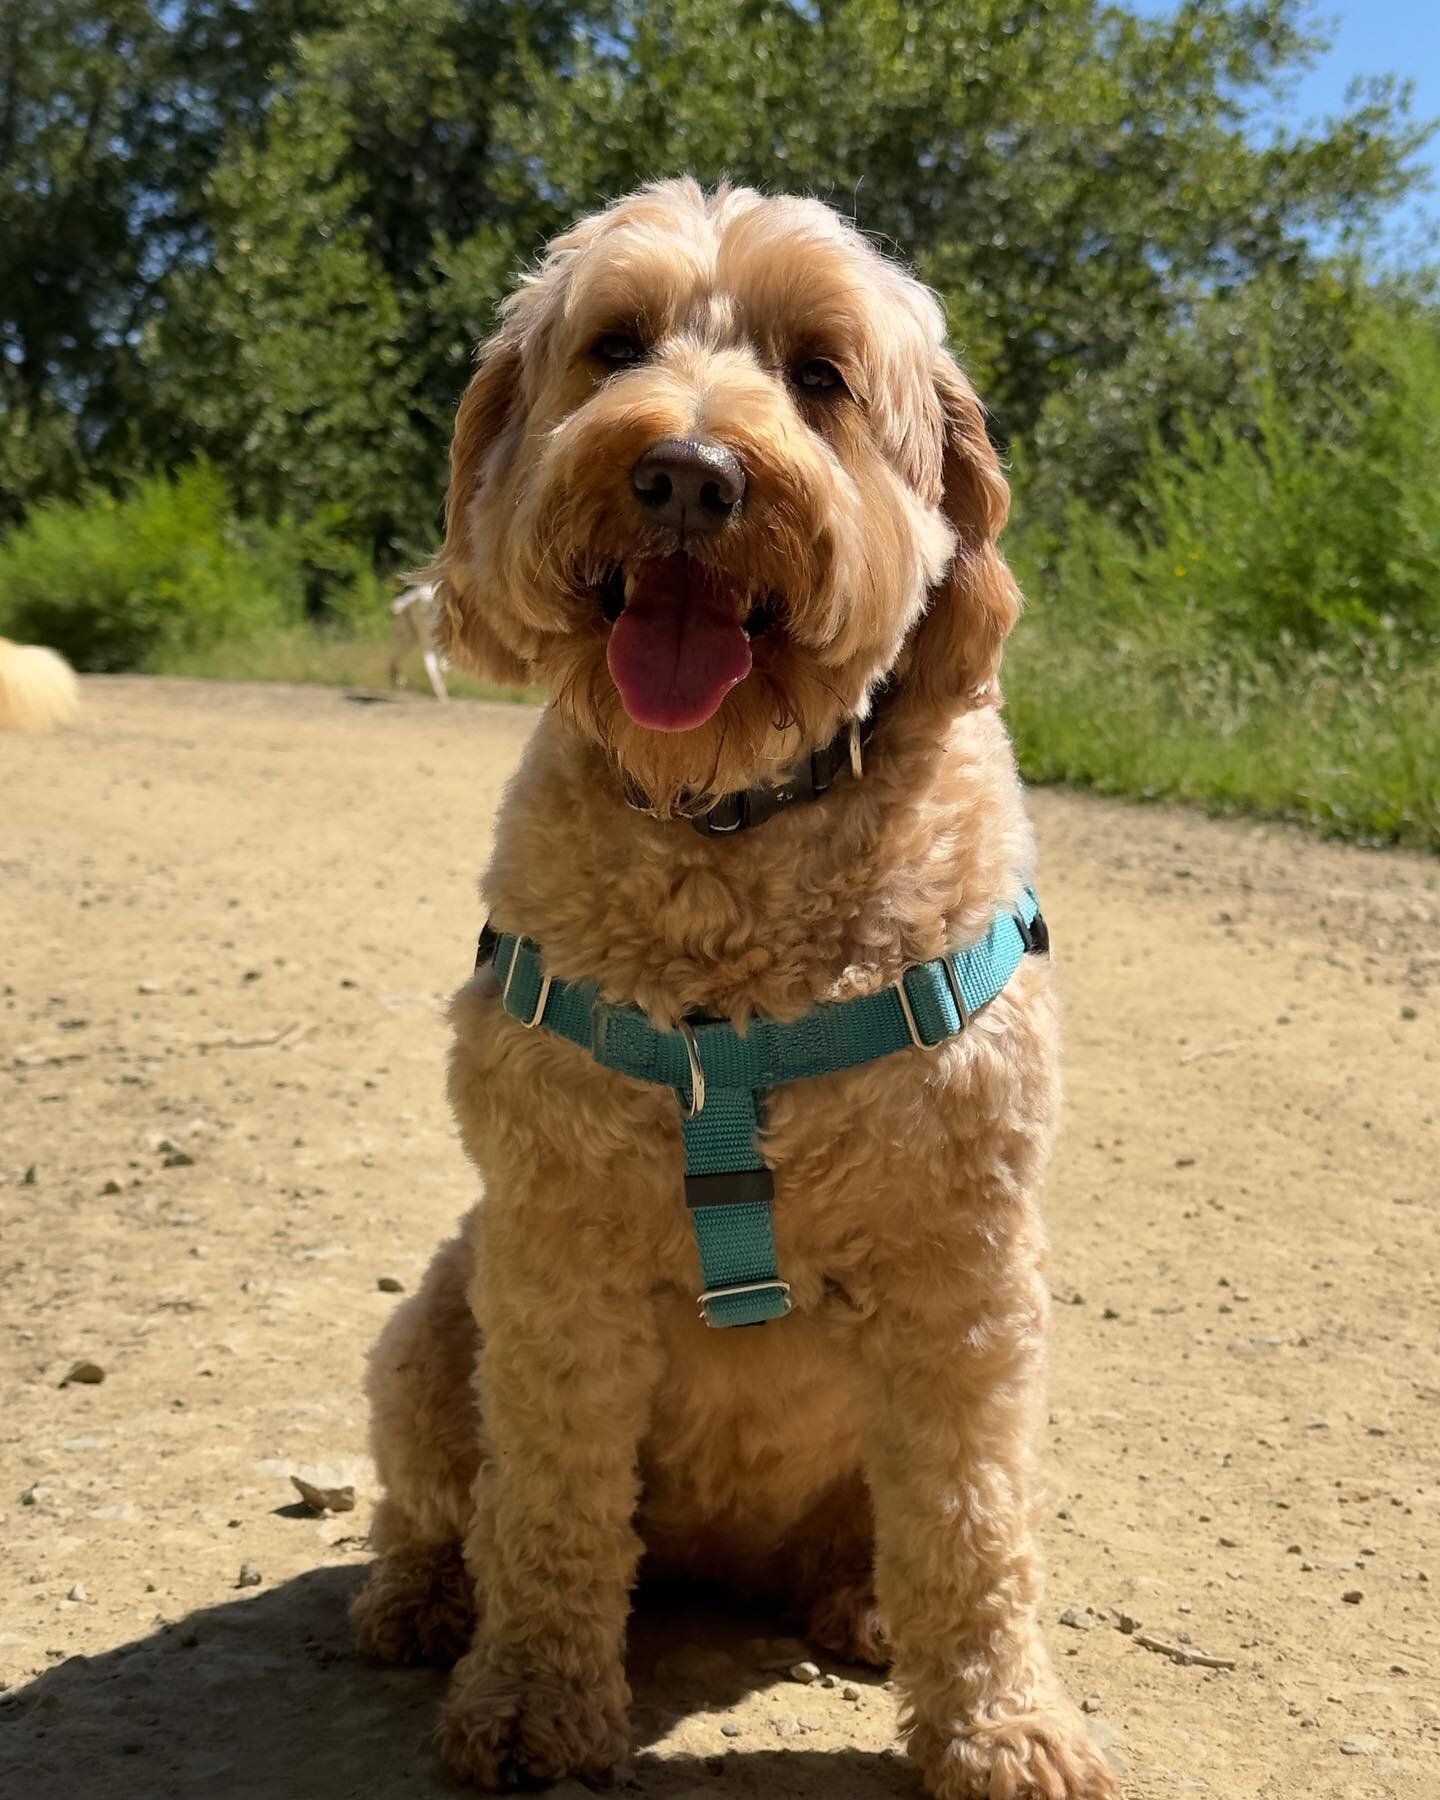 Way late in the game introducing Penny! Penny loves her hiking buddies and meeting every single human on the trail! #marincanineadventures #doglife #happydog #dogsofinsta #dogsofinstagram #dogohotography #marindogs #traildogs #hikewithdogs #outdoordo